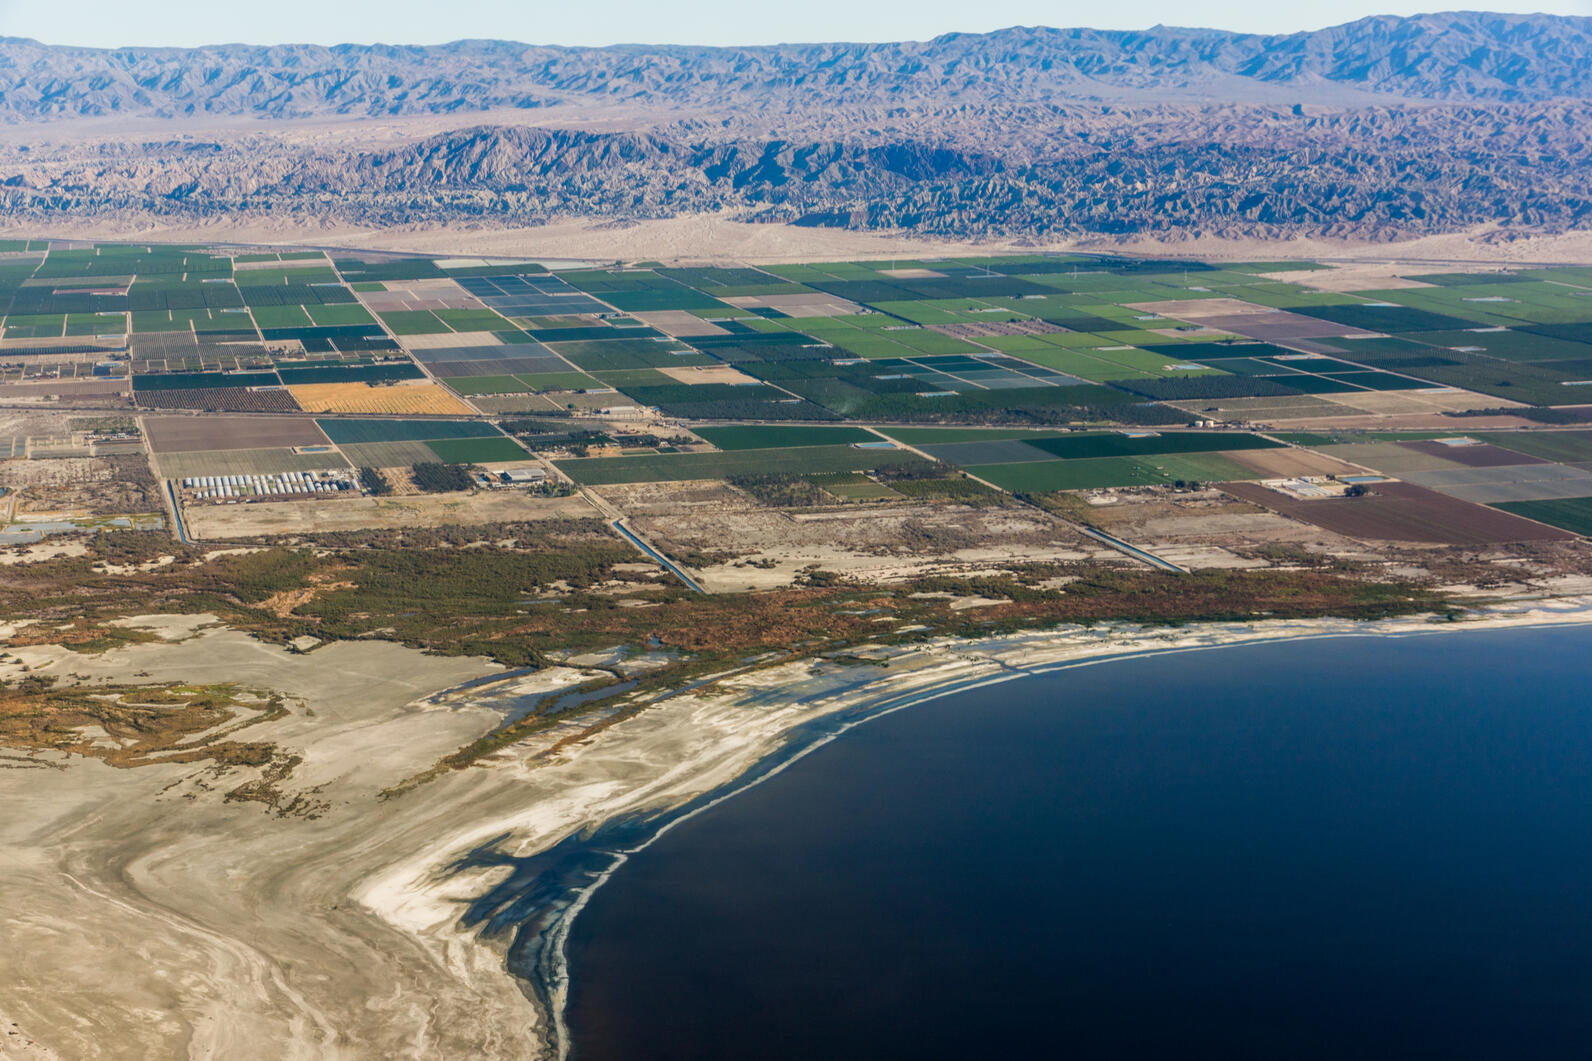 Aerial photo of the Salton Sea's receding shoreline, bordered by agricultural fields